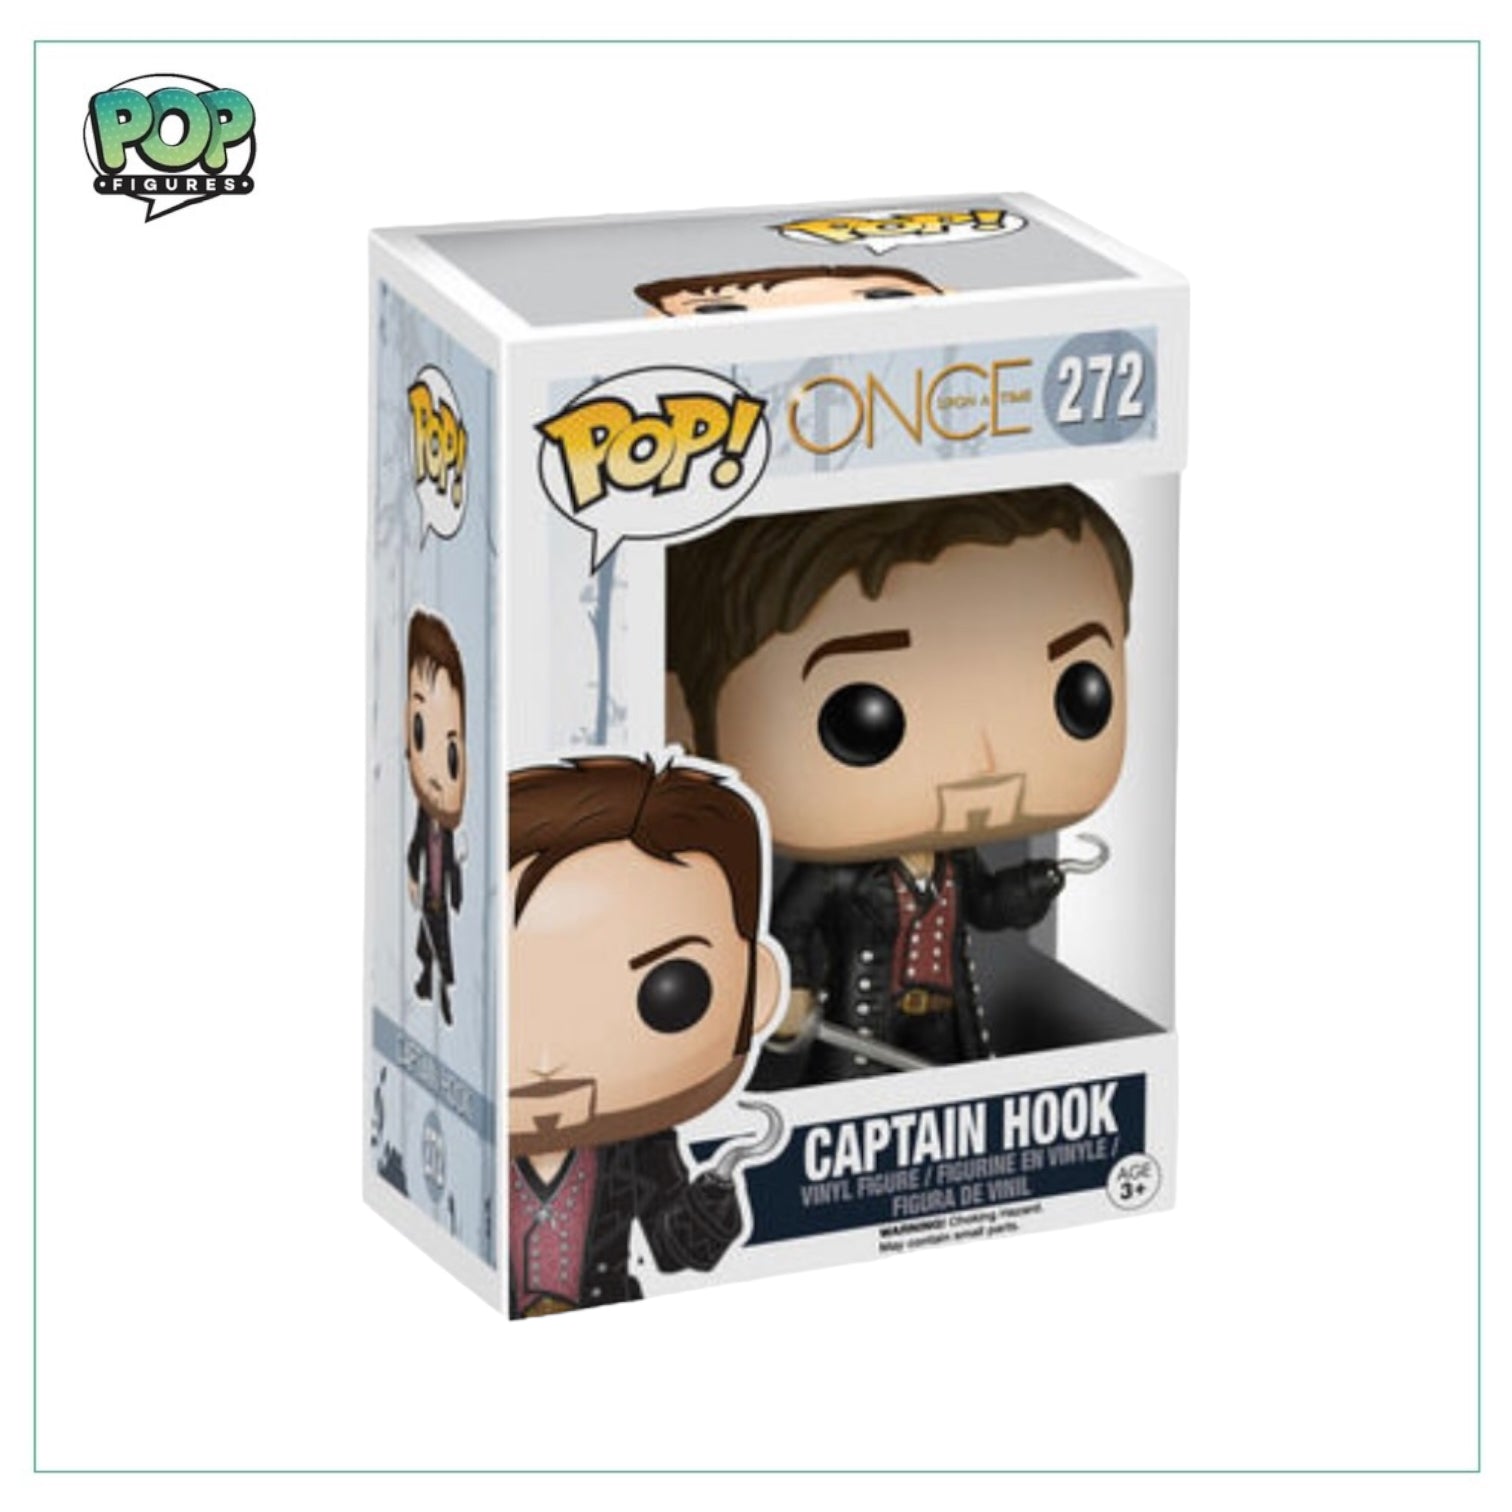 Captain Hook #272 Funko Pop! - Once upon a time - 2015 Pop - Condition